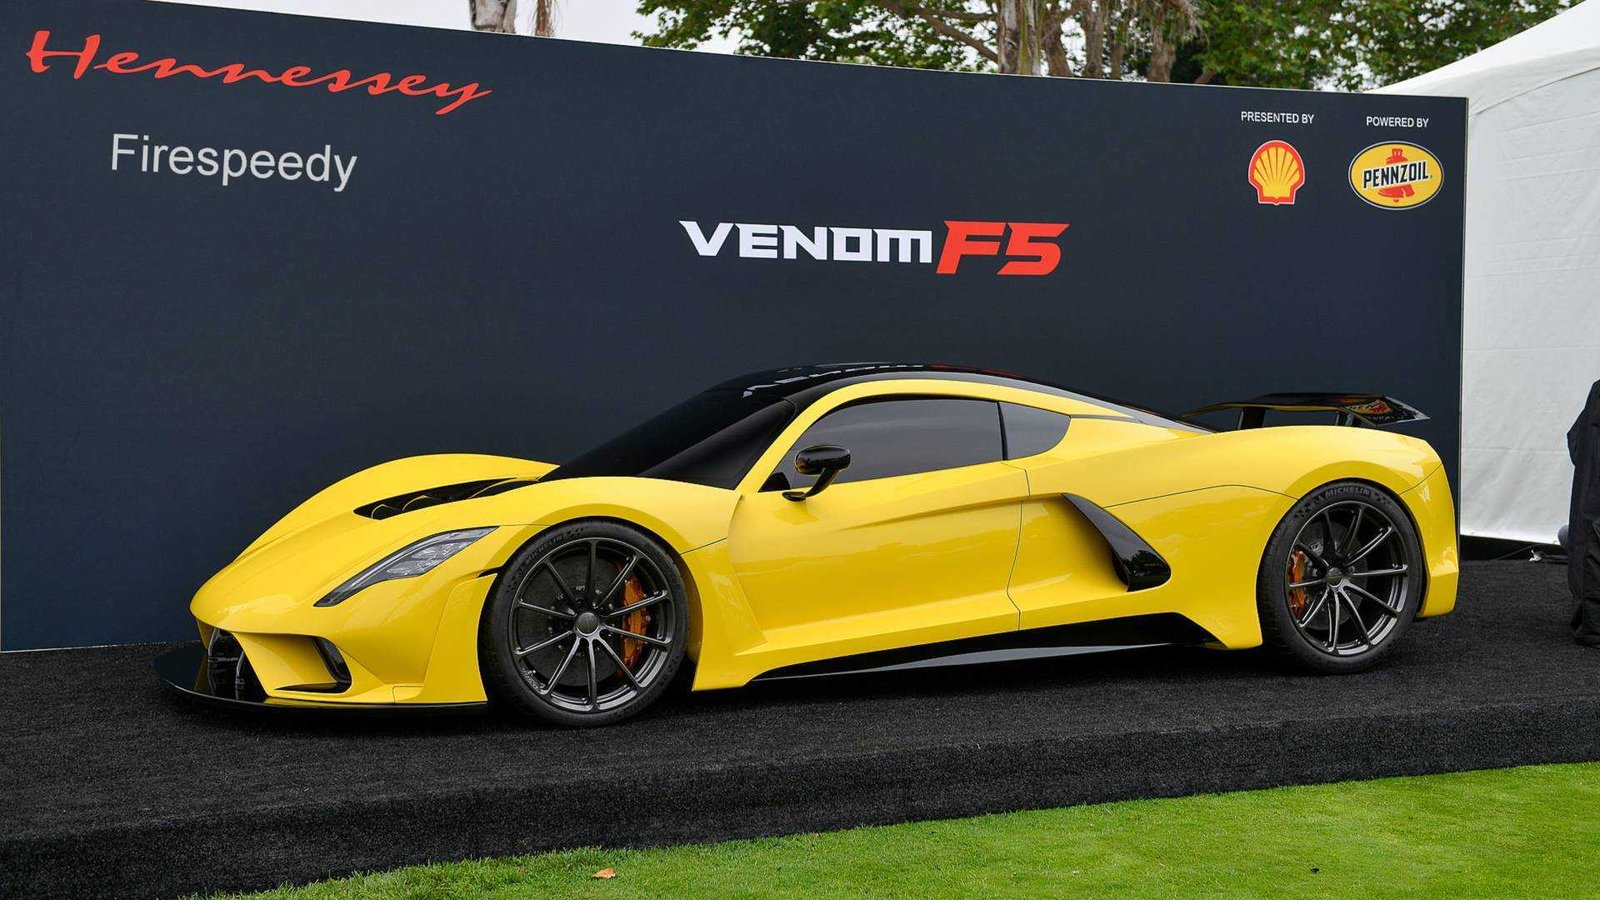 Hennessey Venom F5 | Second Fastest Car in the world 2020